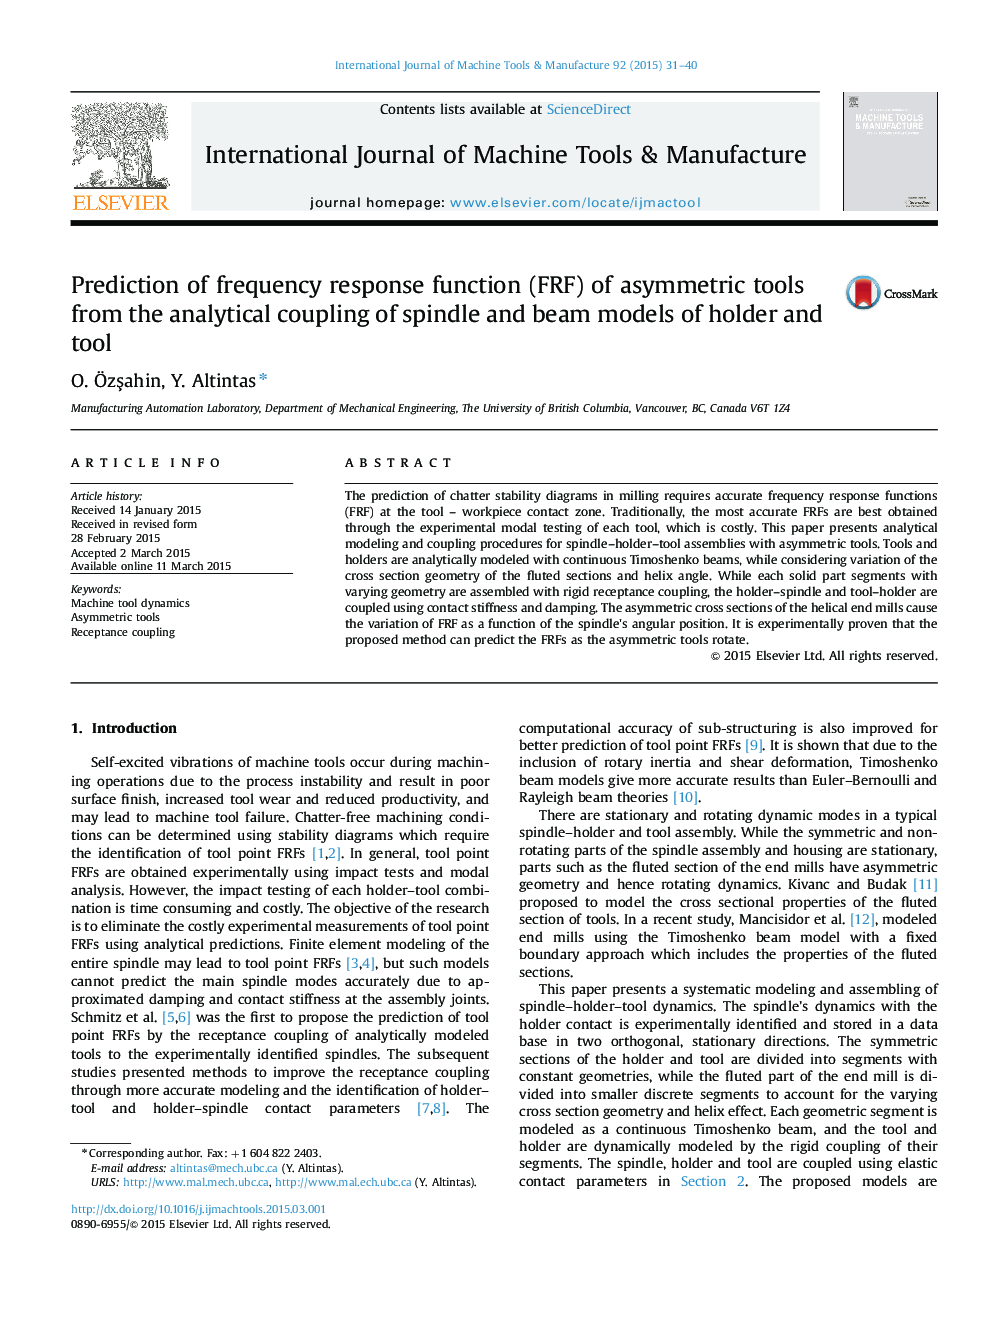 Prediction of frequency response function (FRF) of asymmetric tools from the analytical coupling of spindle and beam models of holder and tool